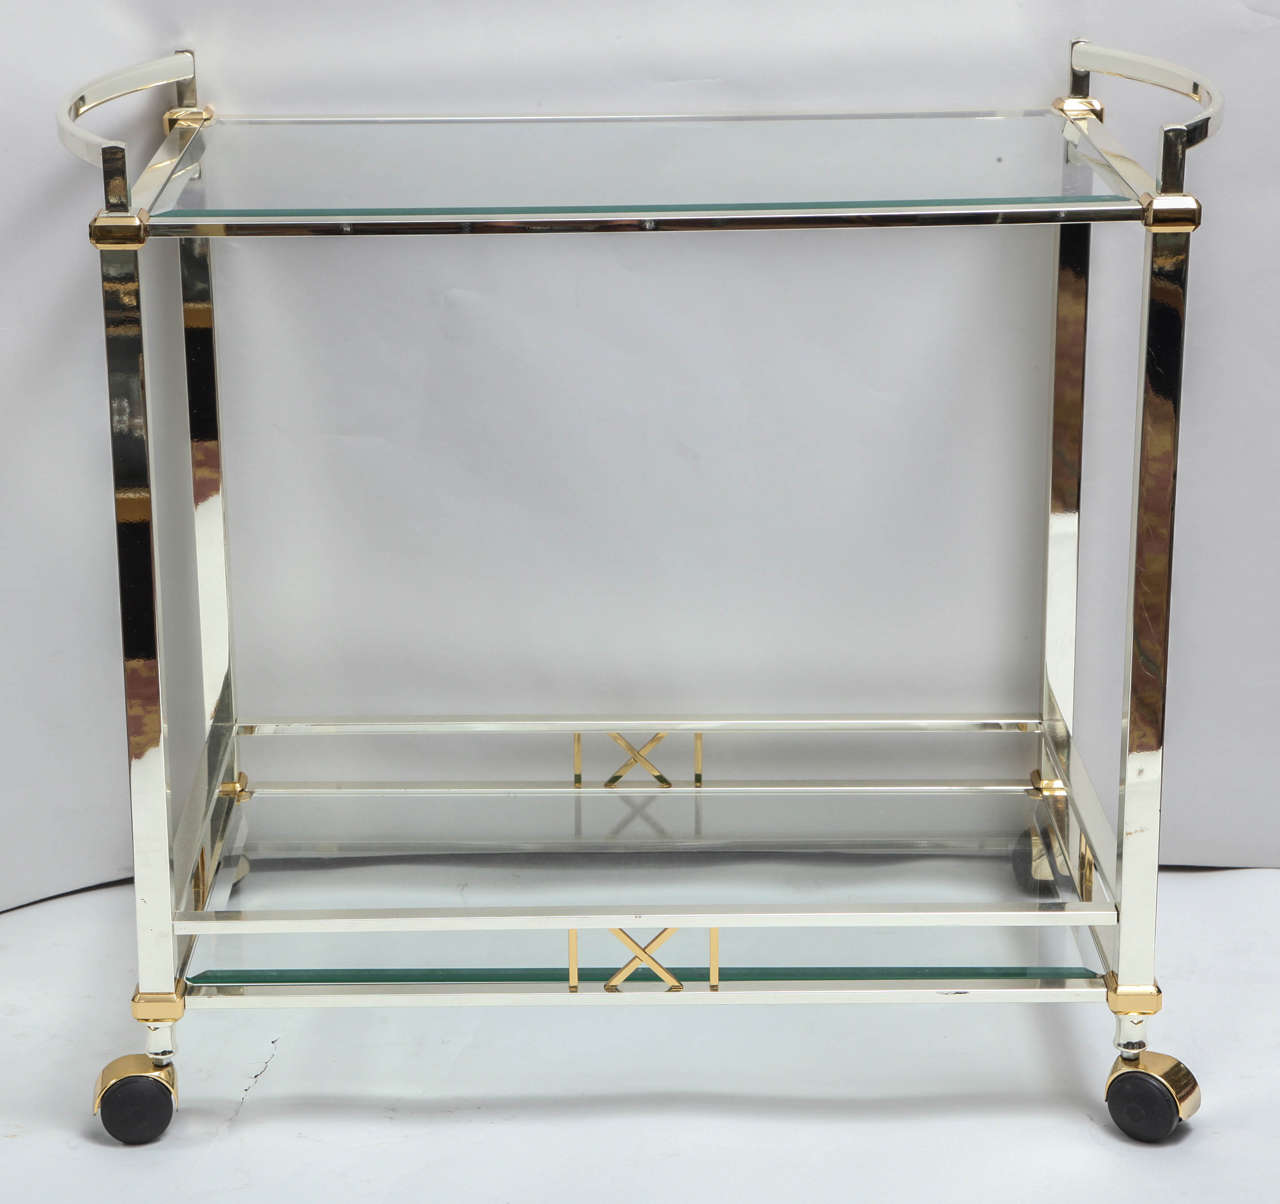 A sleek and stylish nickel-plated bar cart with brass details with two-tiered beveled glass shelves made by the Italian furniture company Orseniga. This highly functional cart is on great rolling casters and is able to fit in a modern interior